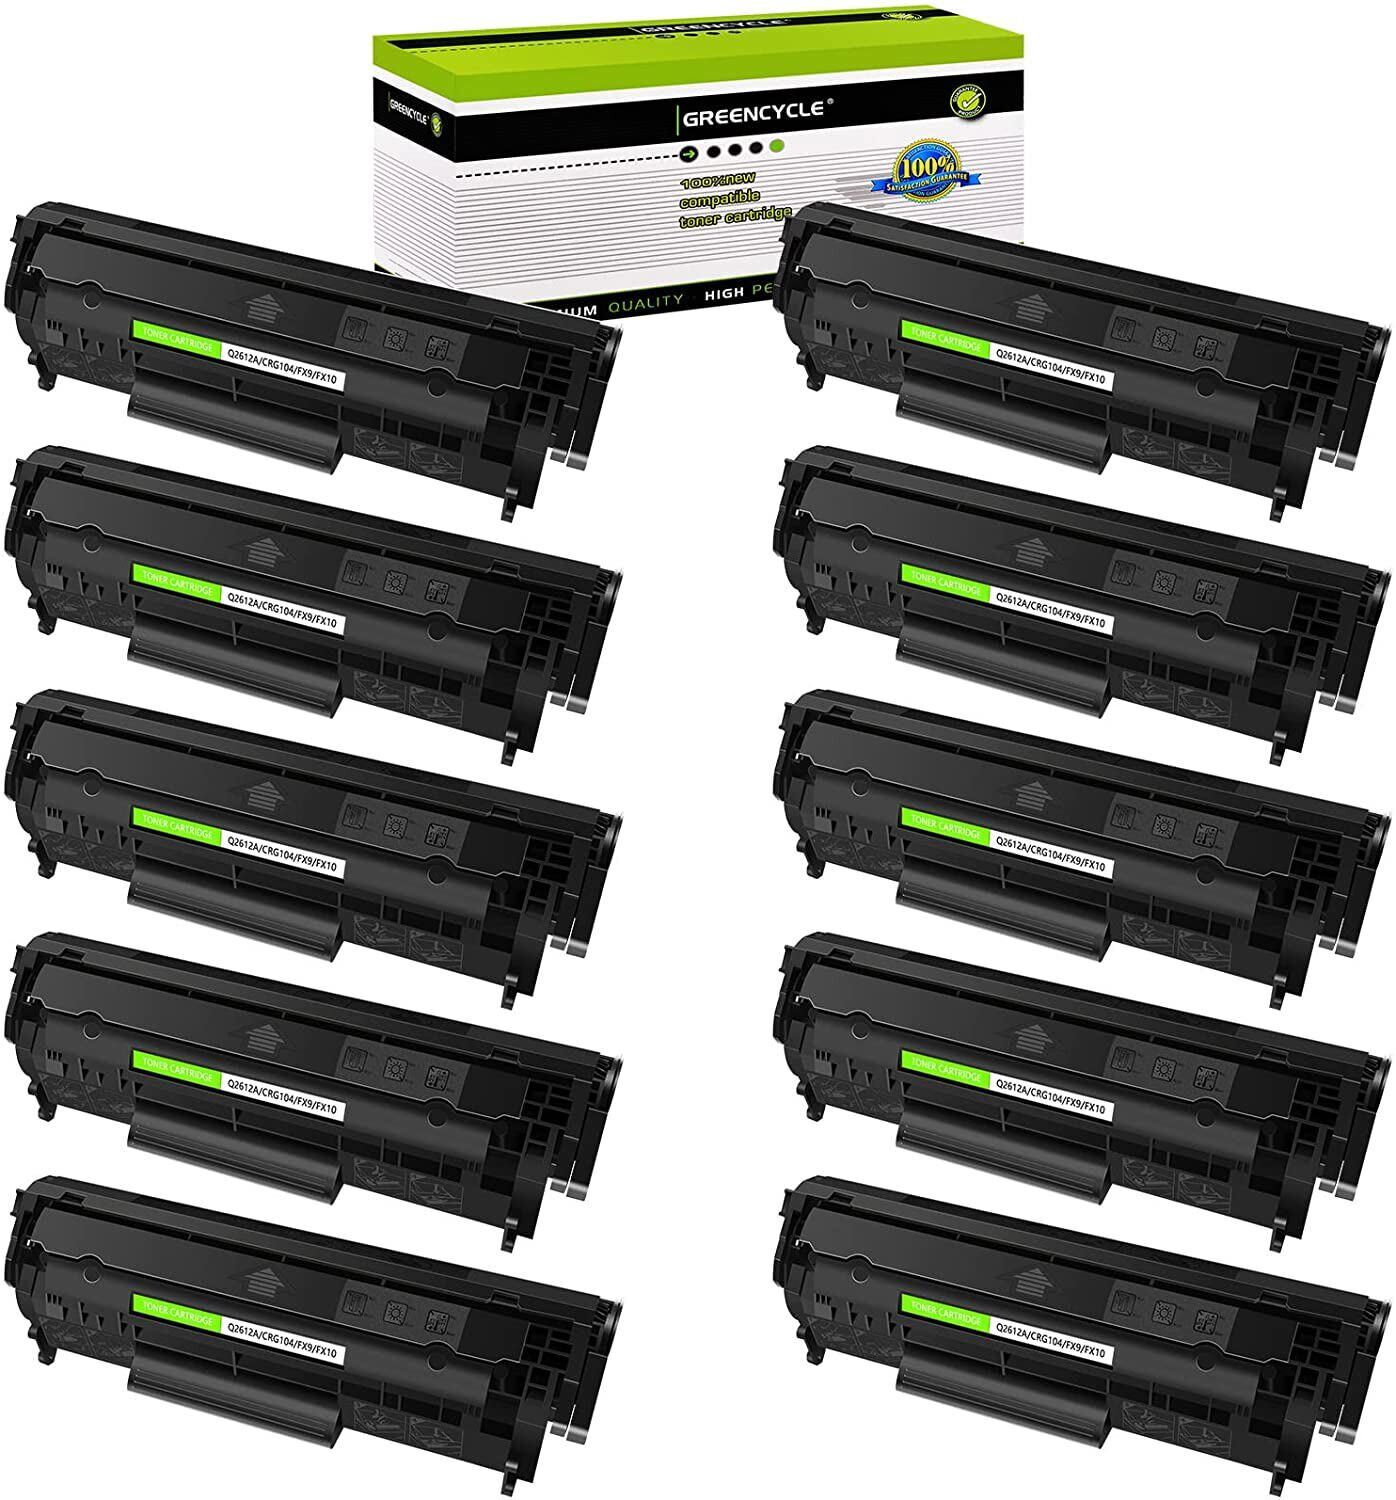 GREENCYCLE 10PK Q2612A 12A Toner Fit for HP 12A LaserJet 3050 3052 30551018 1020